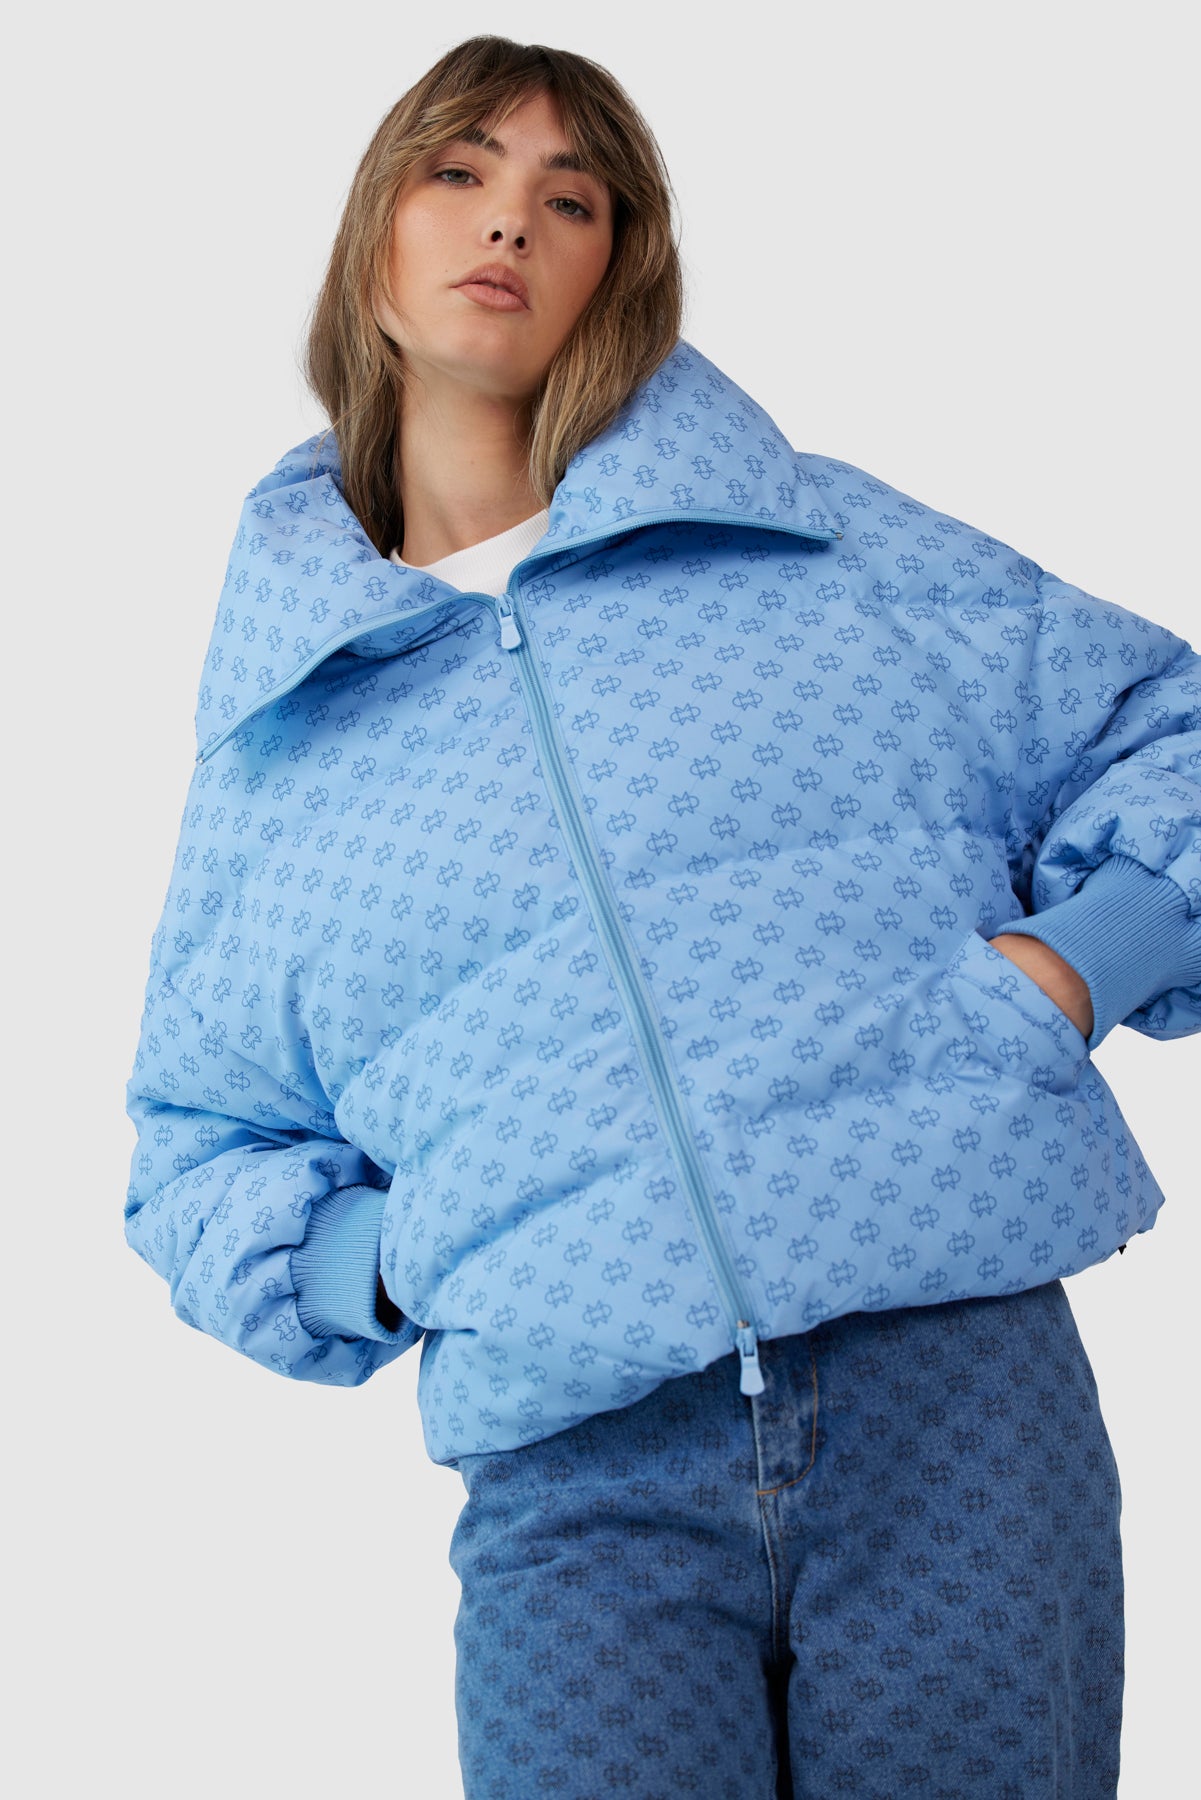 C/MEO Collective - Meet Me There Puffer - Blue Monogram